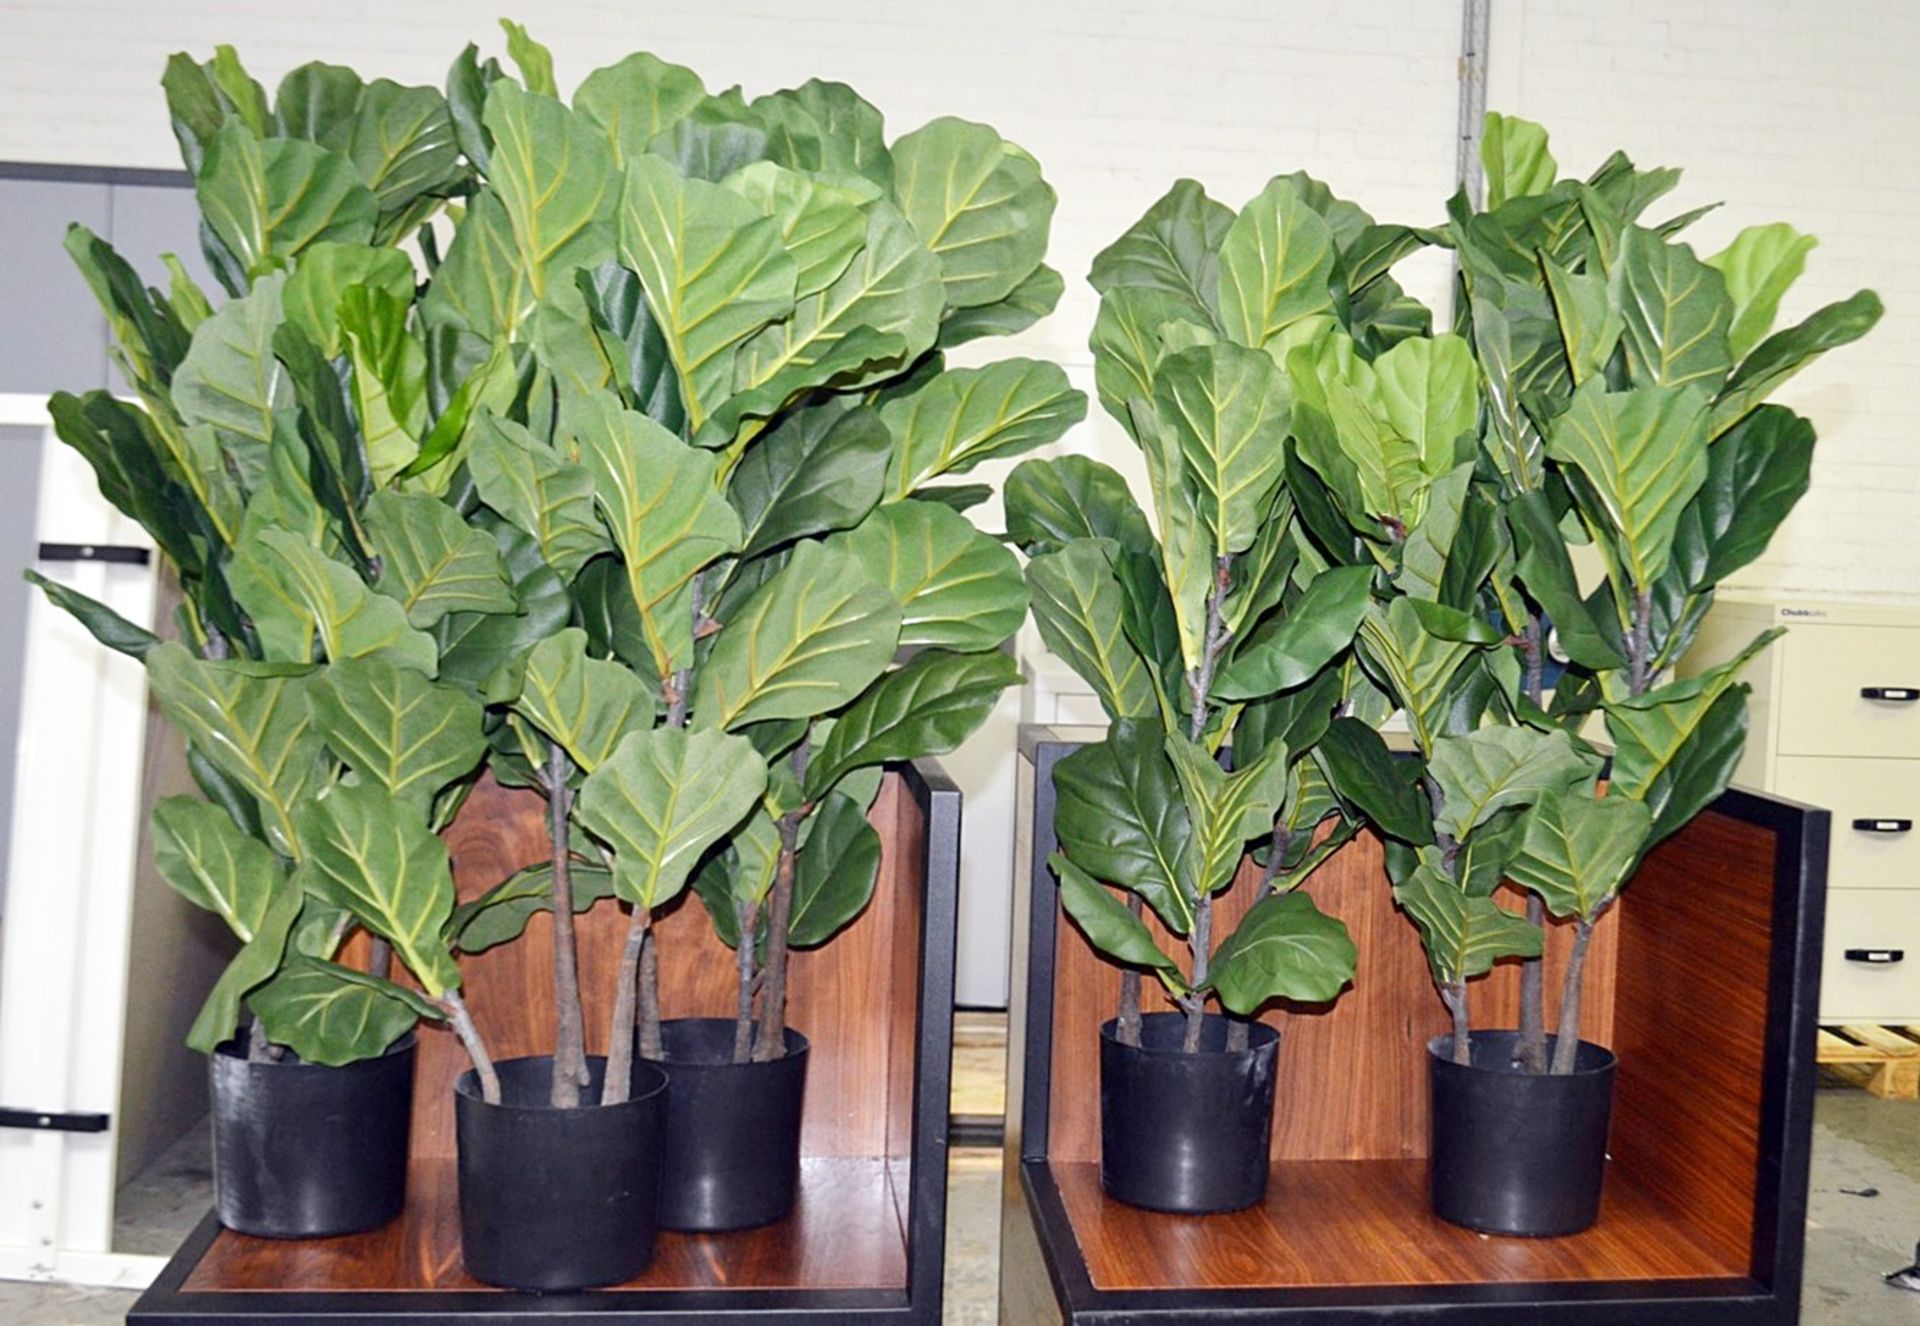 5 x Commercial Artificial Medium Sized Potted Plants - Dimensions (approx): H94 x W50cm - Ex- - Image 3 of 3